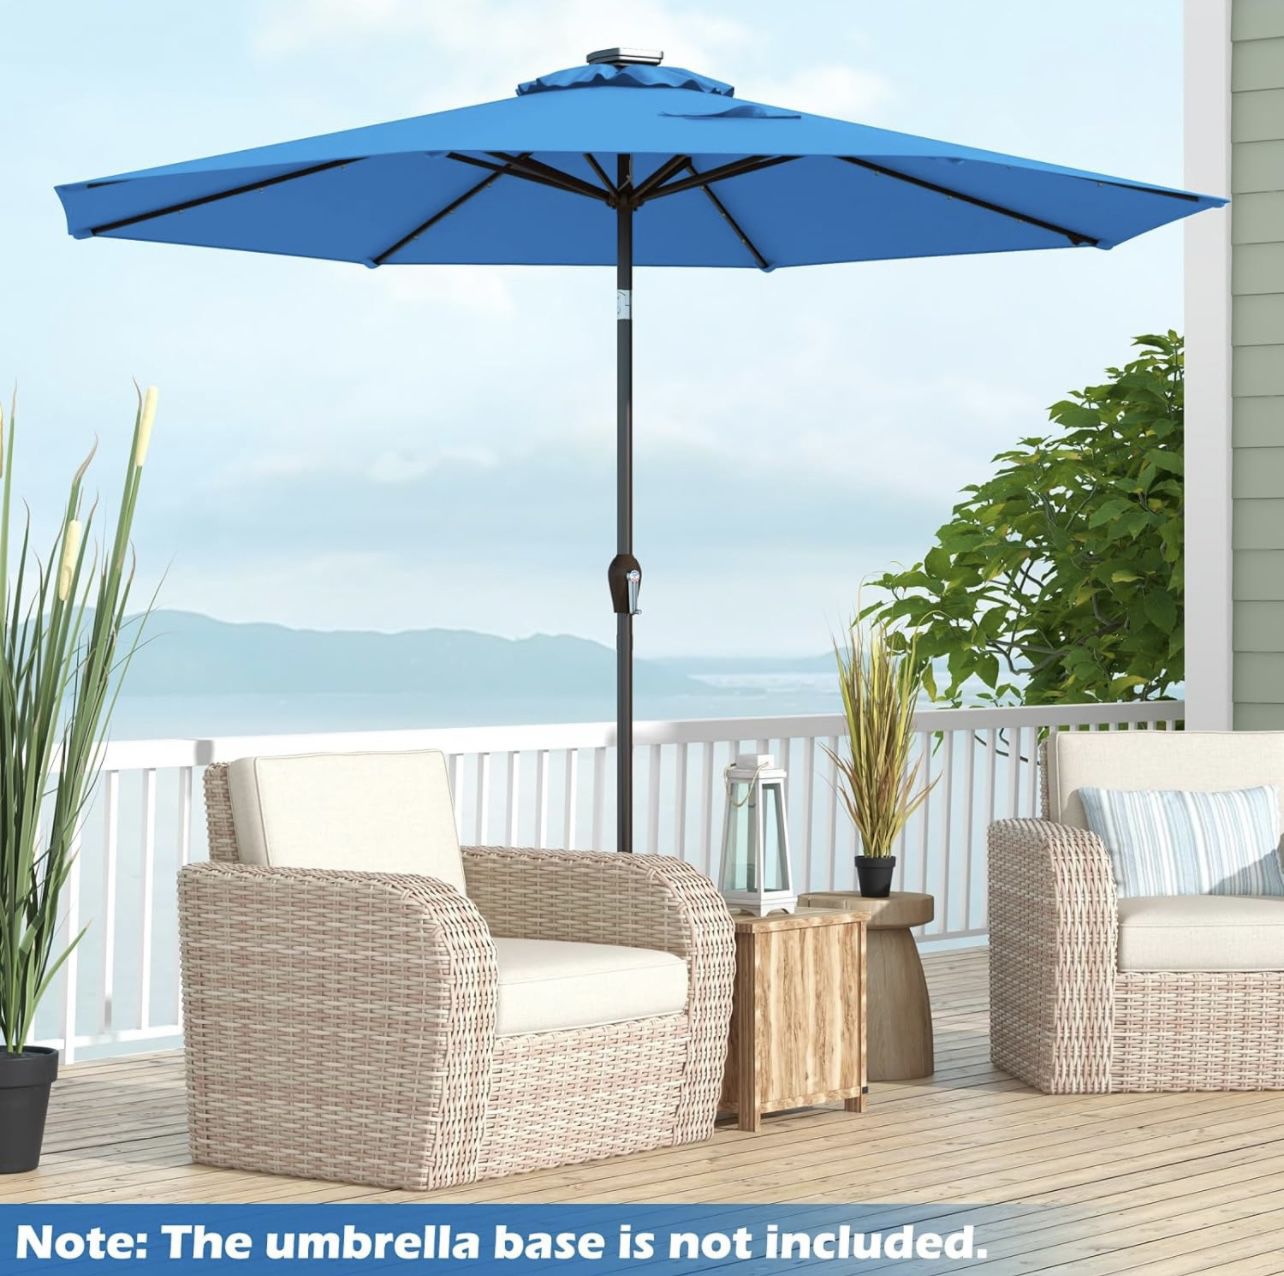  9.7 ft Outdoor Patio umbrella Table Market Umbrella with Crank and Push-button Tilt System ，for Backyard Deck Pool Beach (led light not work )